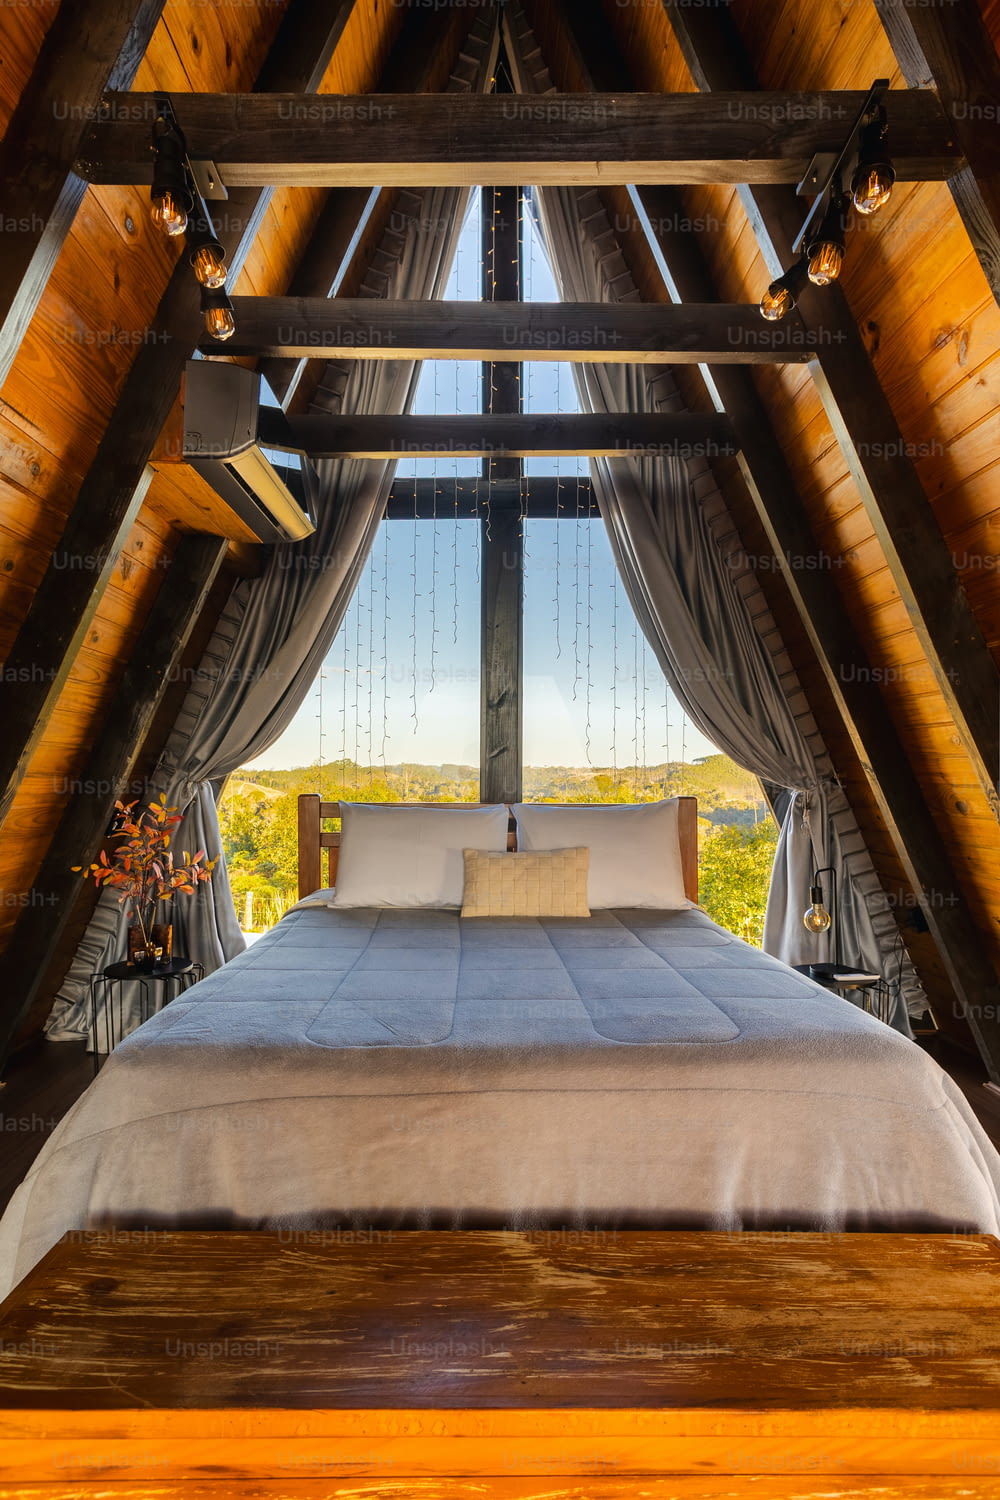 a bed in a room with a wooden ceiling